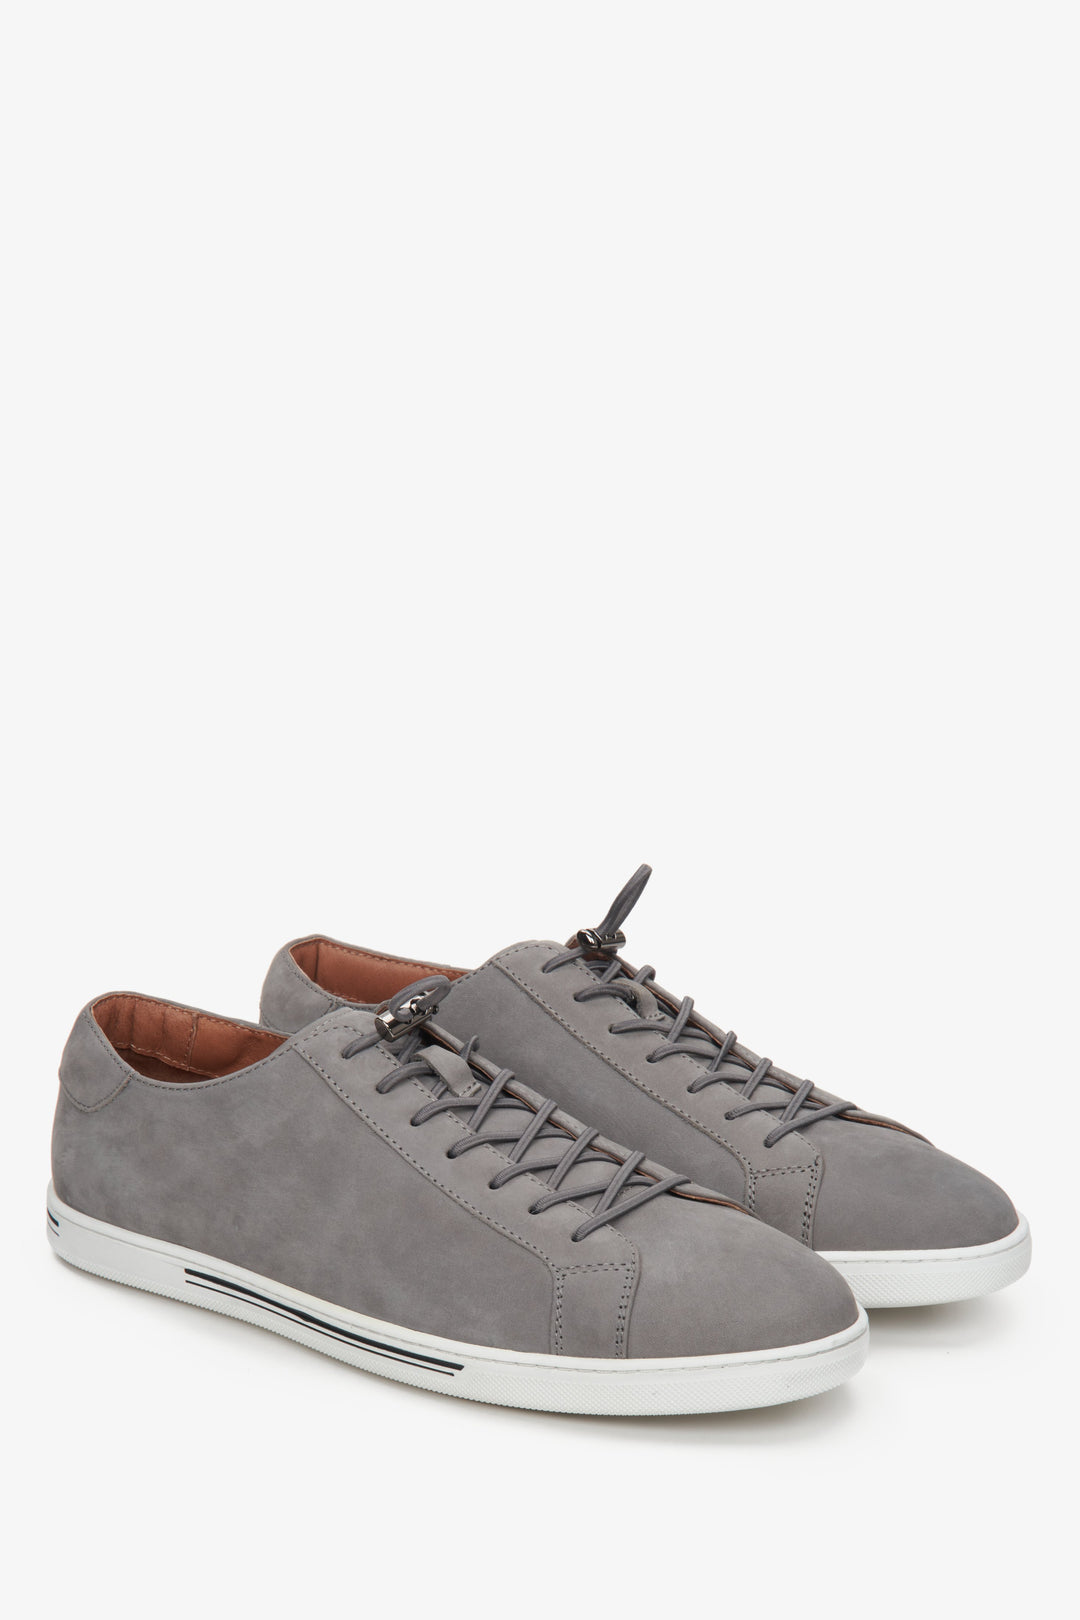 Estro brand grey nubuck men's sneakers - presentation of the toe and side seam of the footwear.